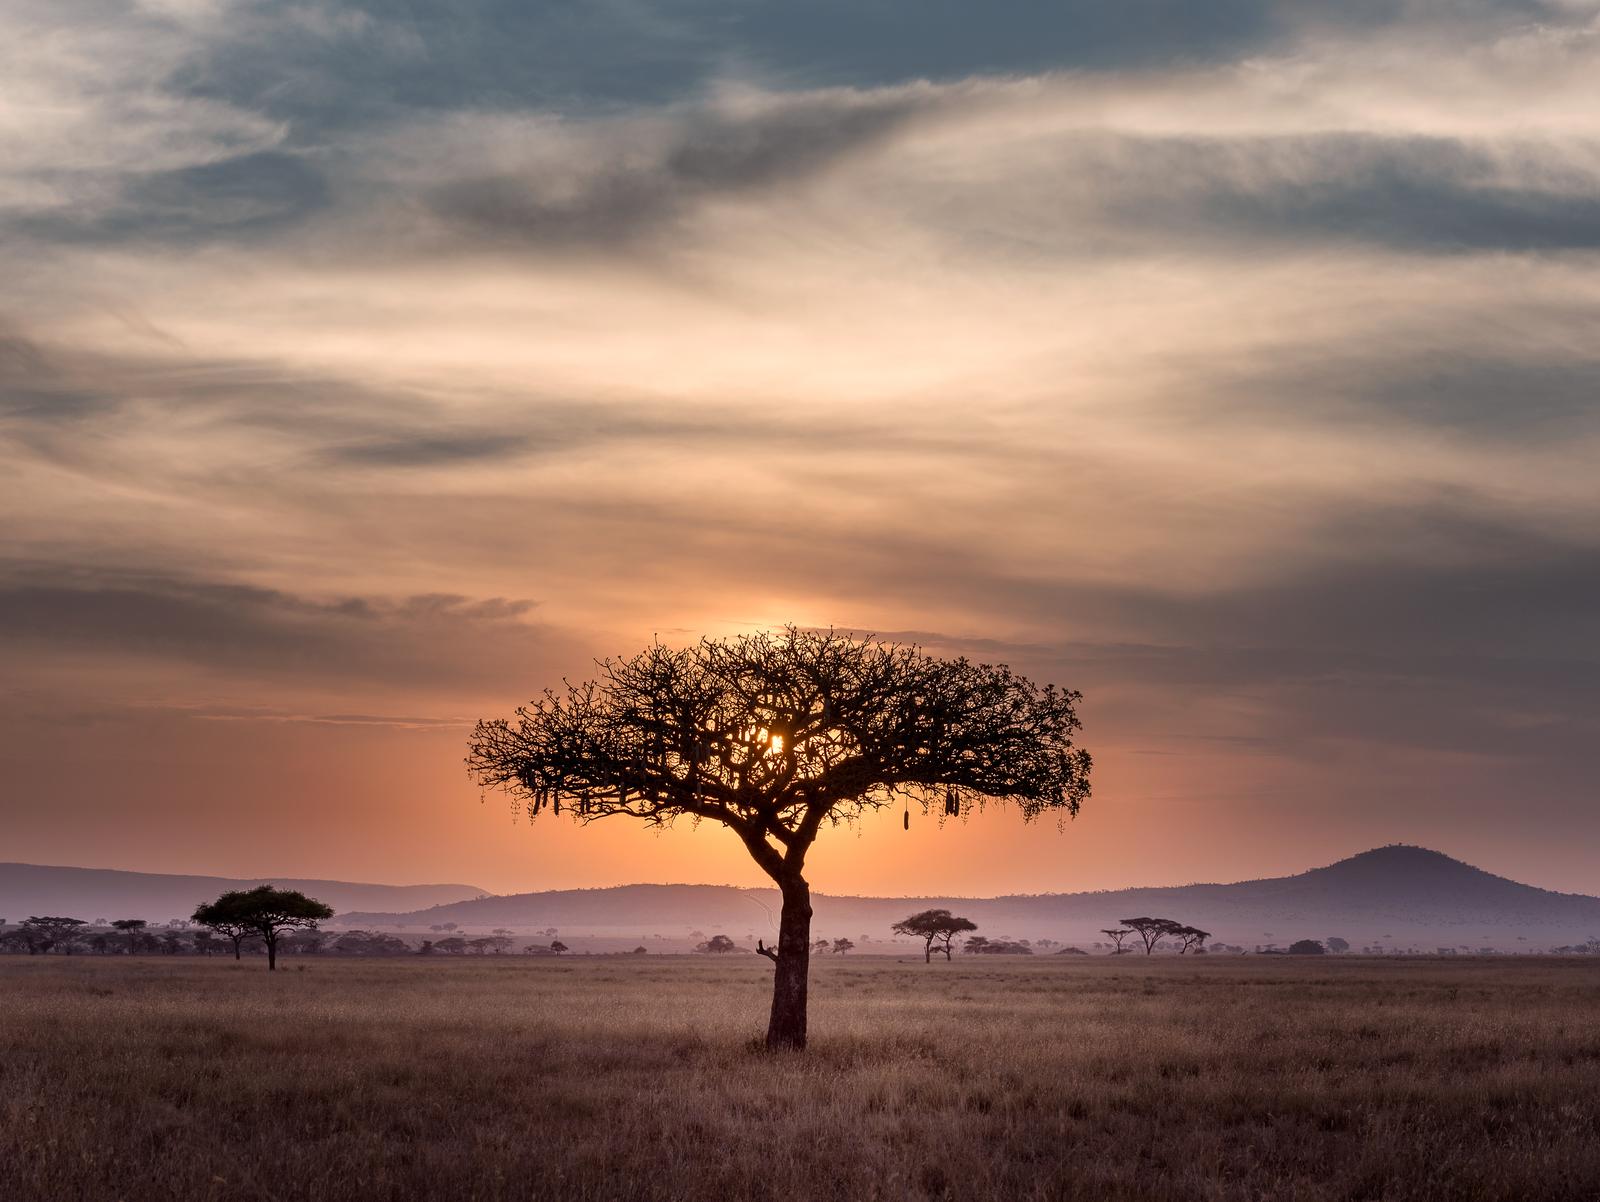 This Travel Quiz Is Scientifically Designed to Determine the Time Period You Belong in Tanzania